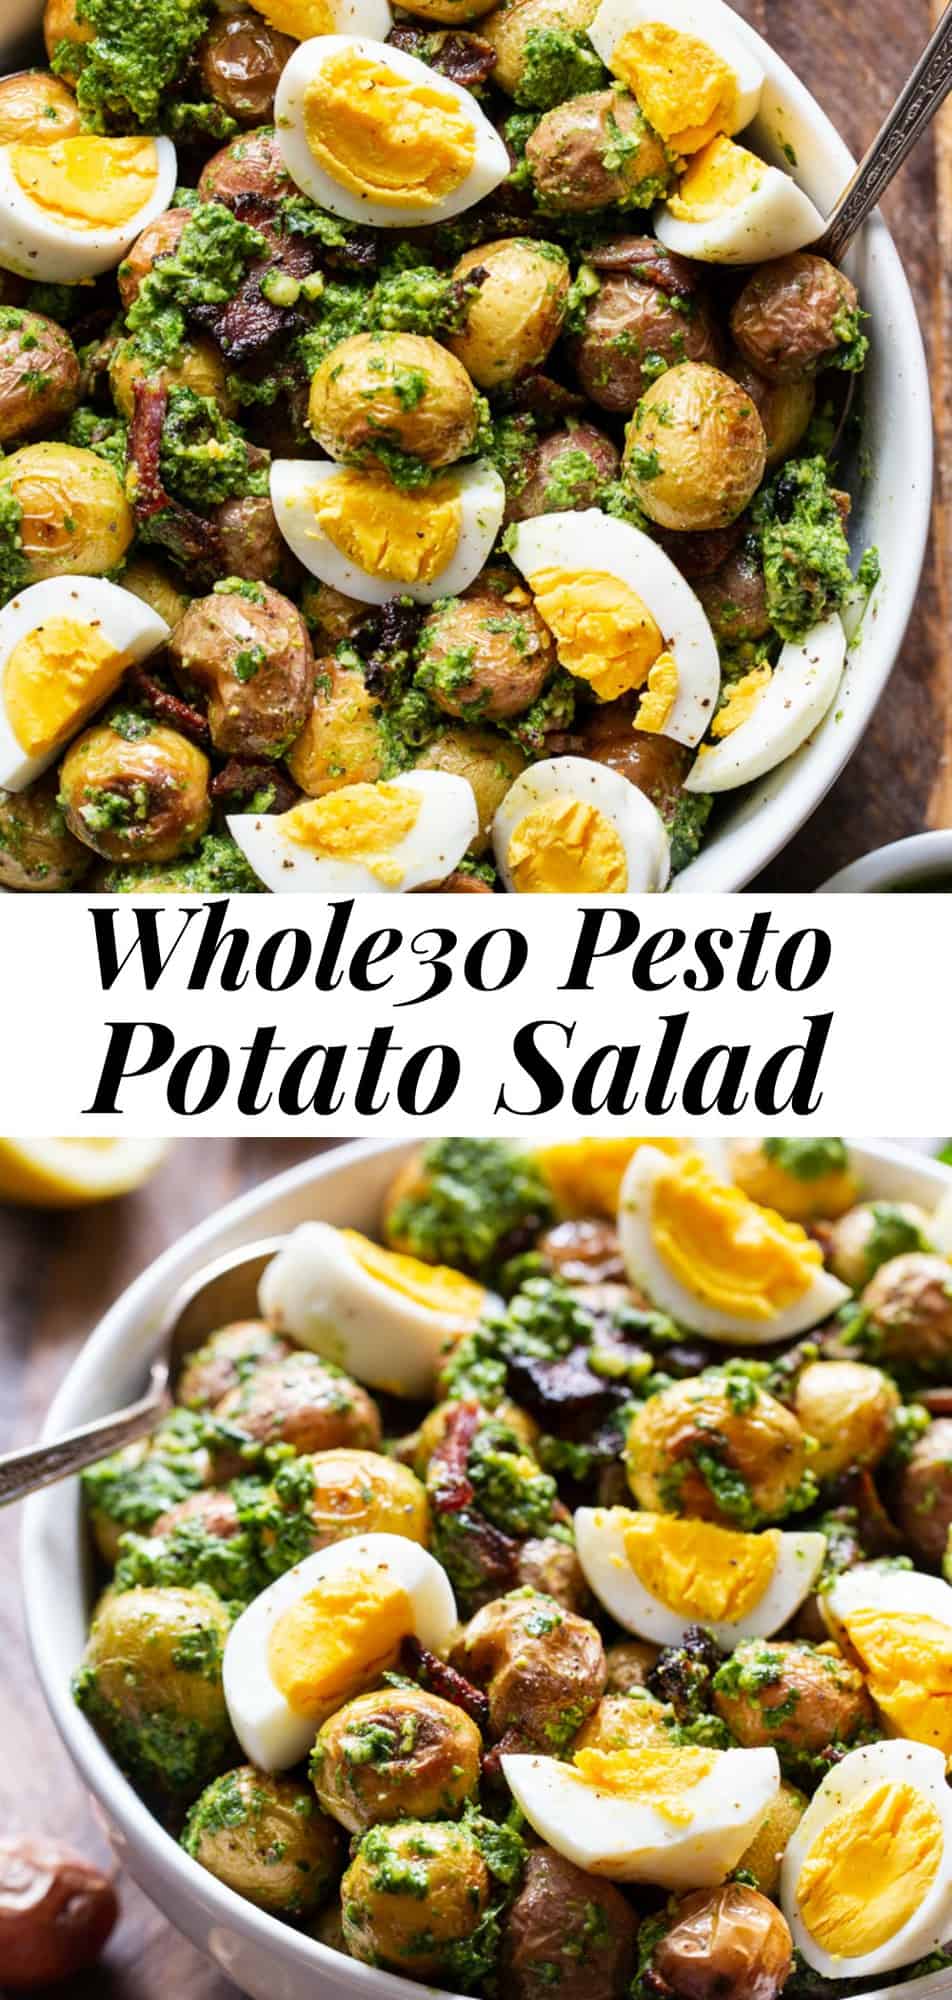 This healthy pesto potato salad is a super tasty twist on your traditional BBQ side dish.  Baby potatoes are roasted to bring out all the flavor and tossed with a dairy-free, Whole30 compliant pesto plus crispy cooked bacon and chopped eggs.  It's perfect served at room temperature or slightly warm. #paleo #whole30 #cleaneating #potatosalad #pesto